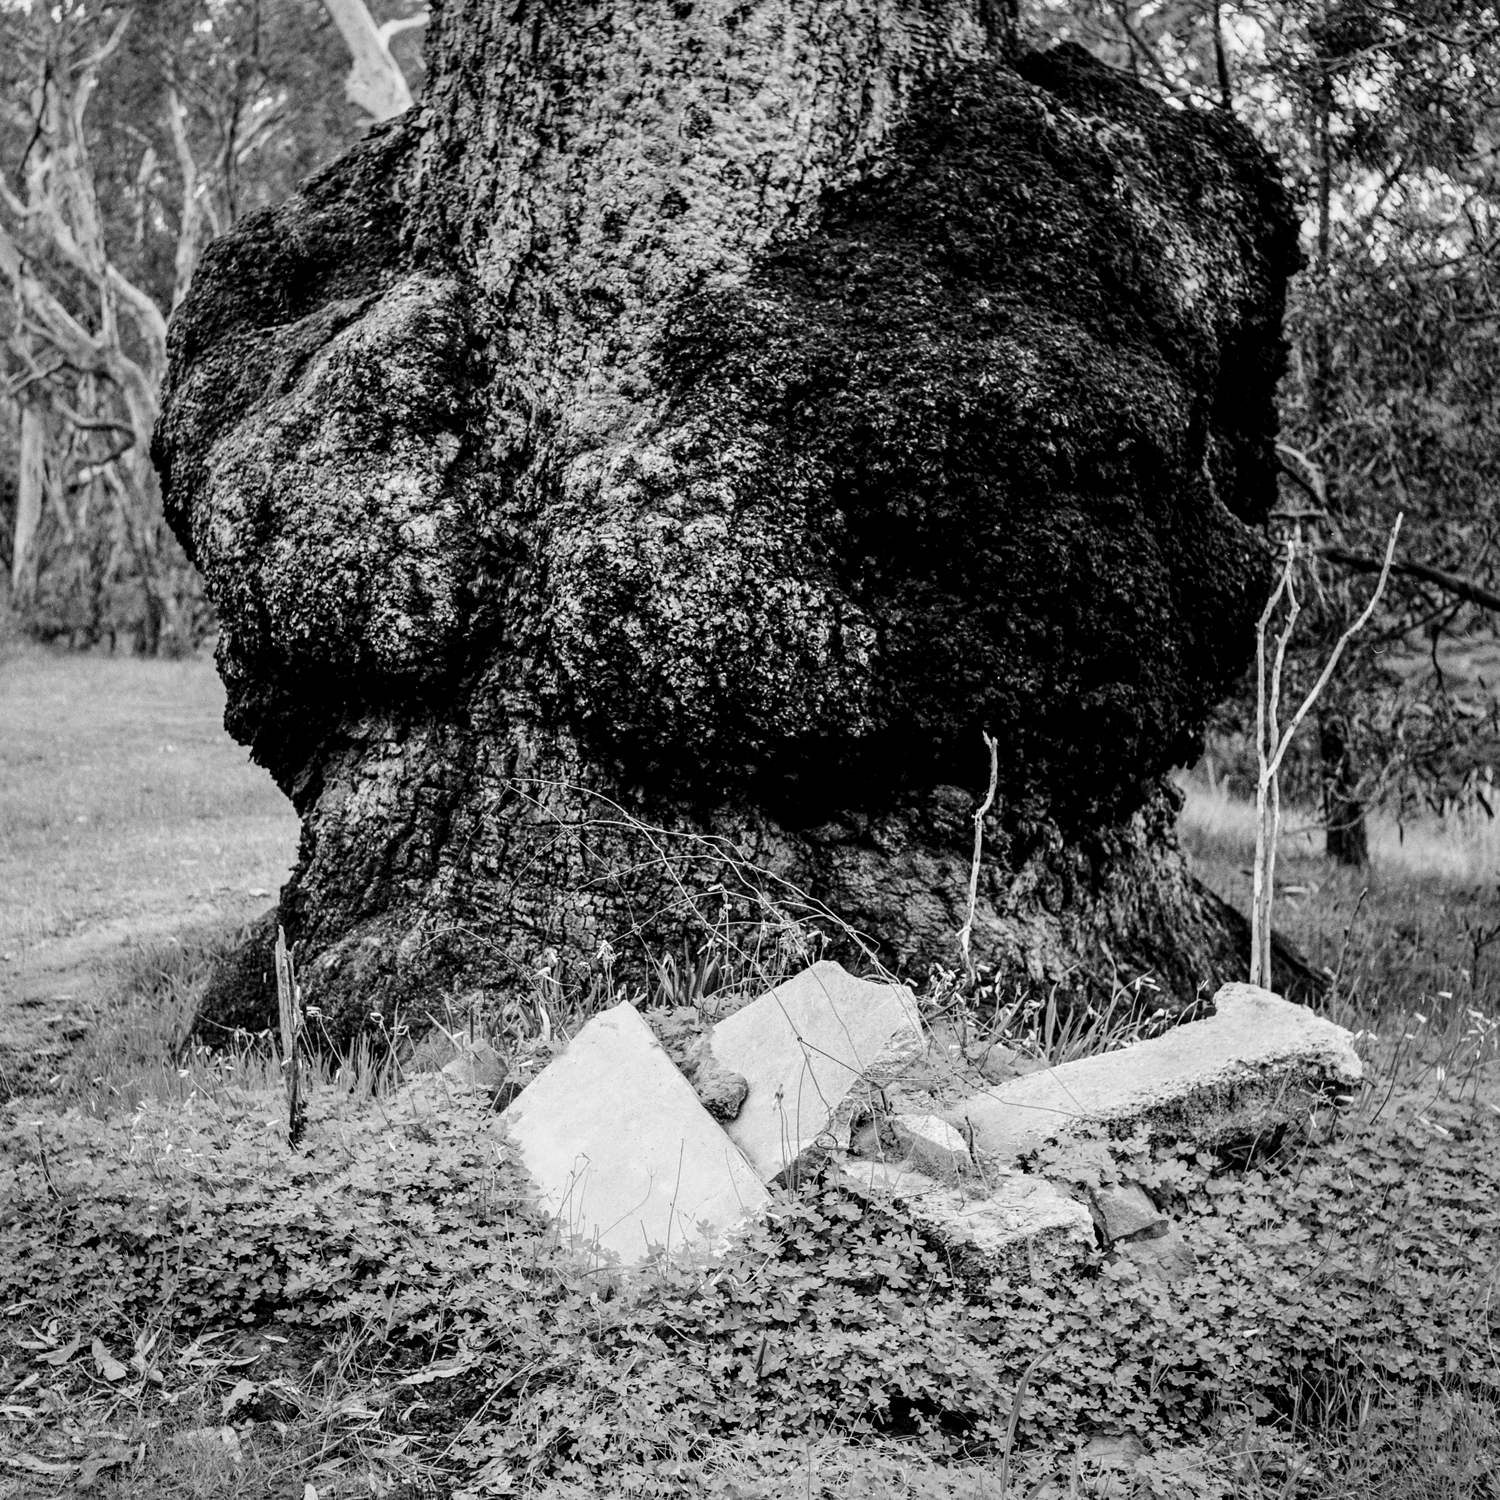 Black and white photograph depicting tree with burl and cement debris placed at its base.